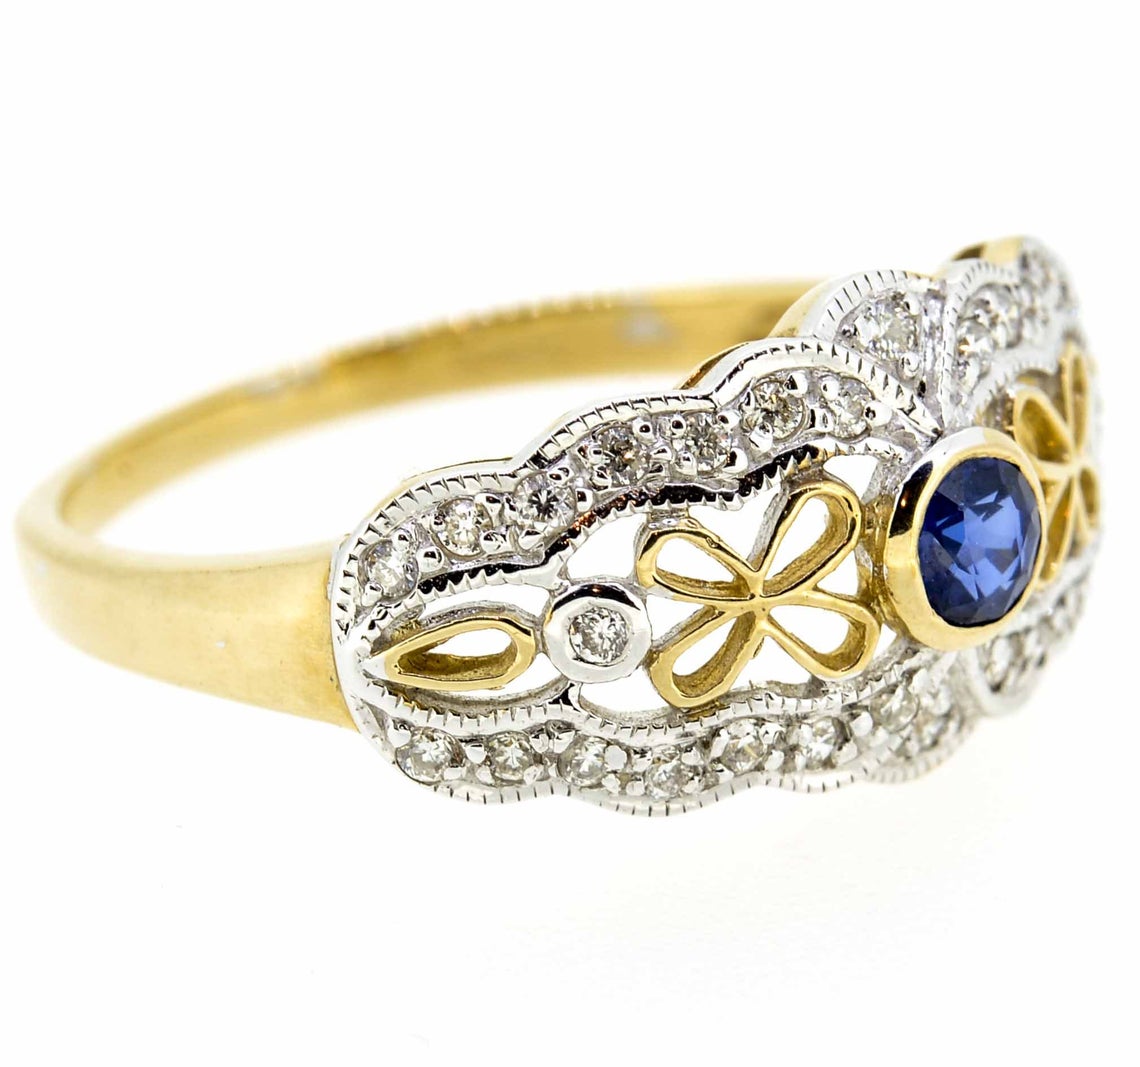 9ct Yellow Gold Antique Style Sapphire and Diamond Ring